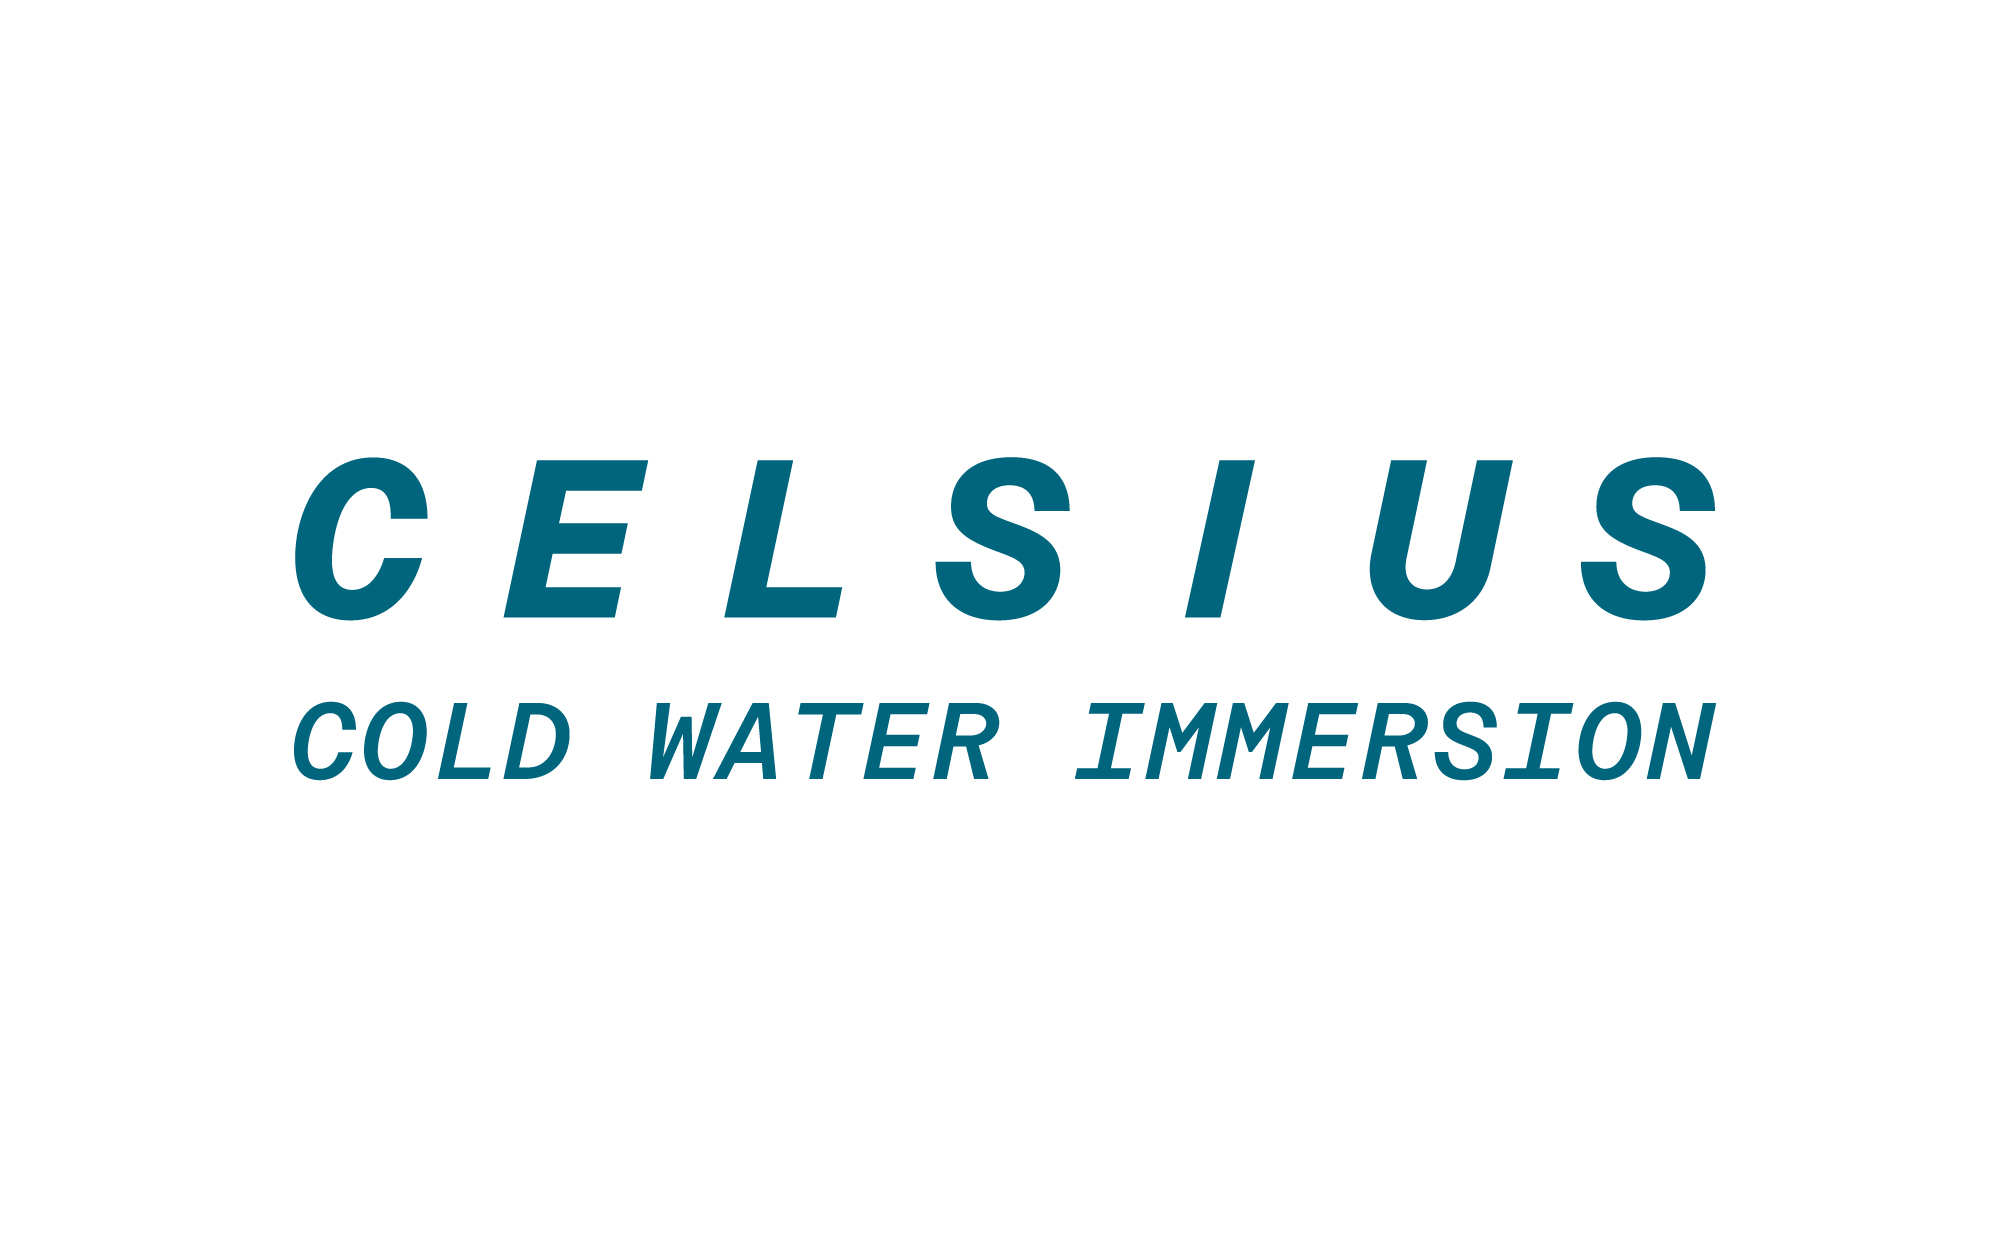 Celsius - Cold Water Immersion